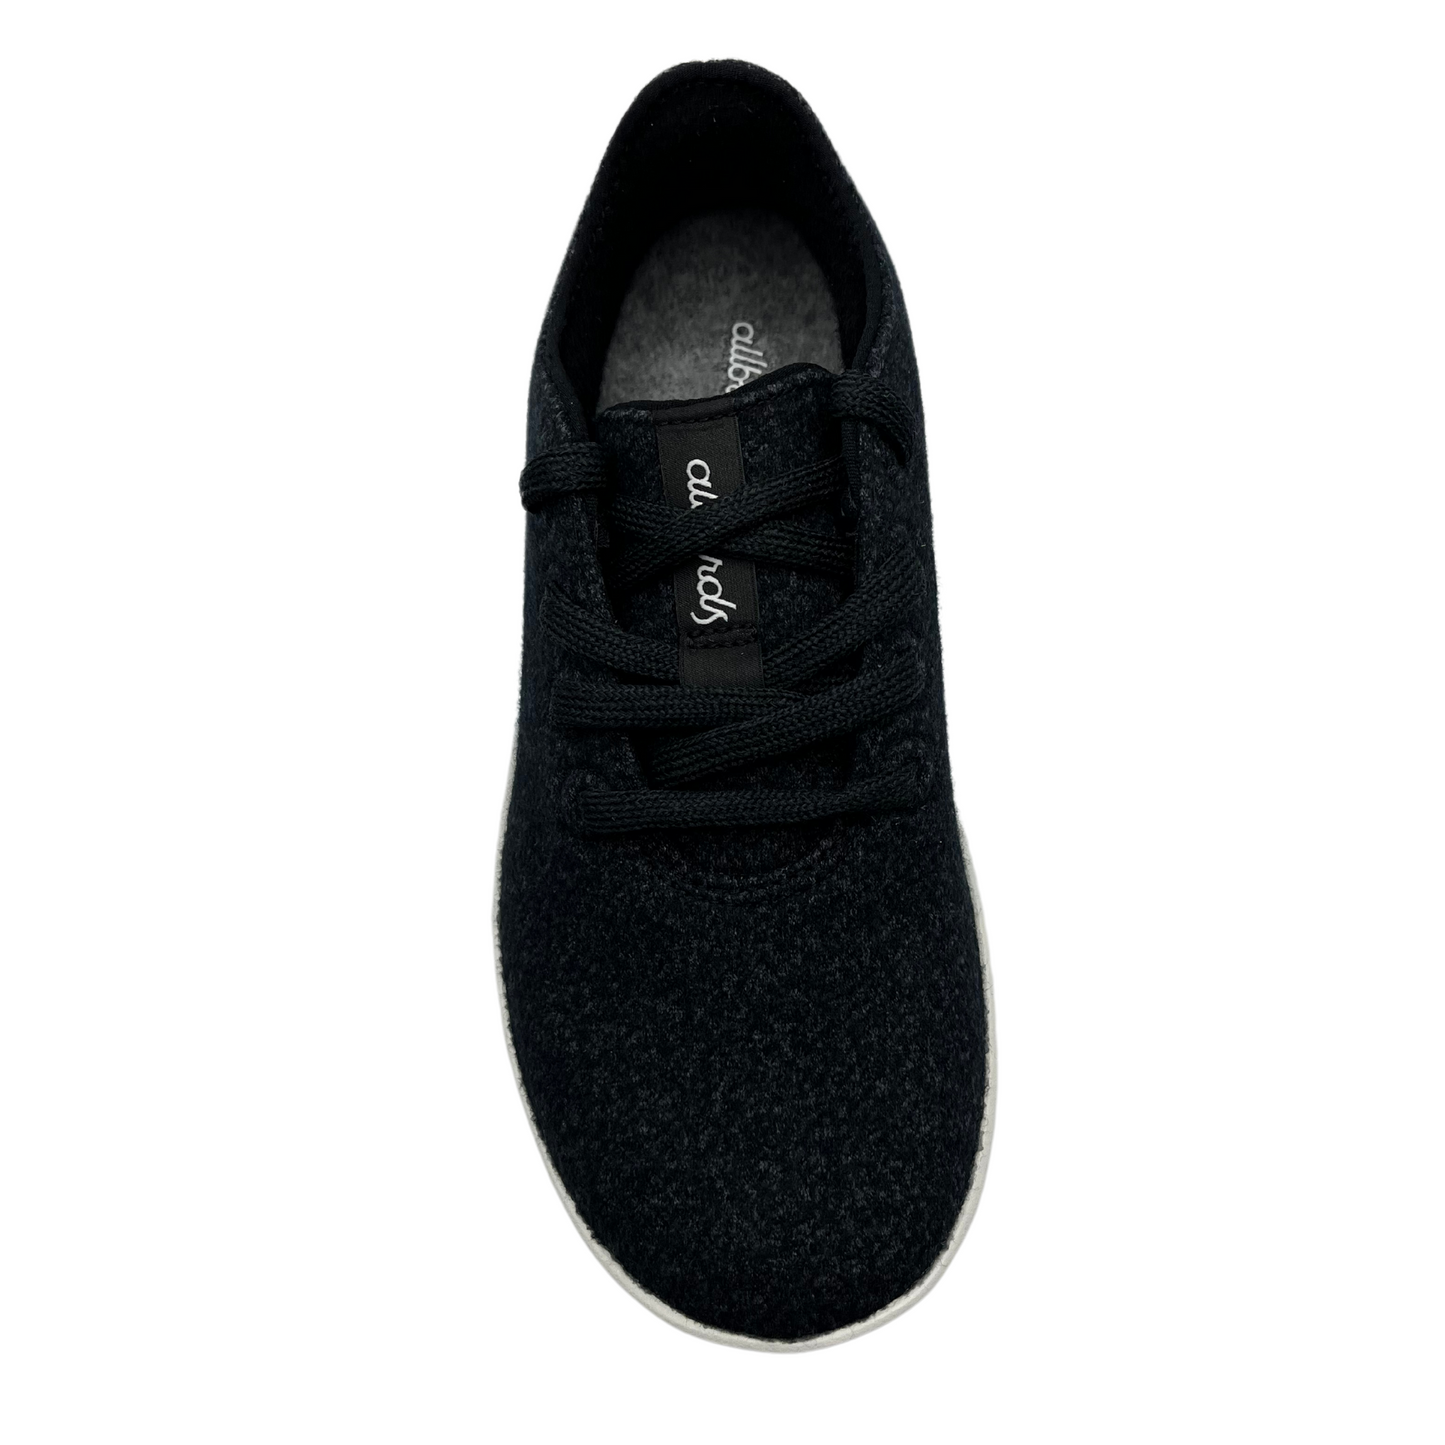 Top view of natural black merino wool sneaker with matching laces and white outsole